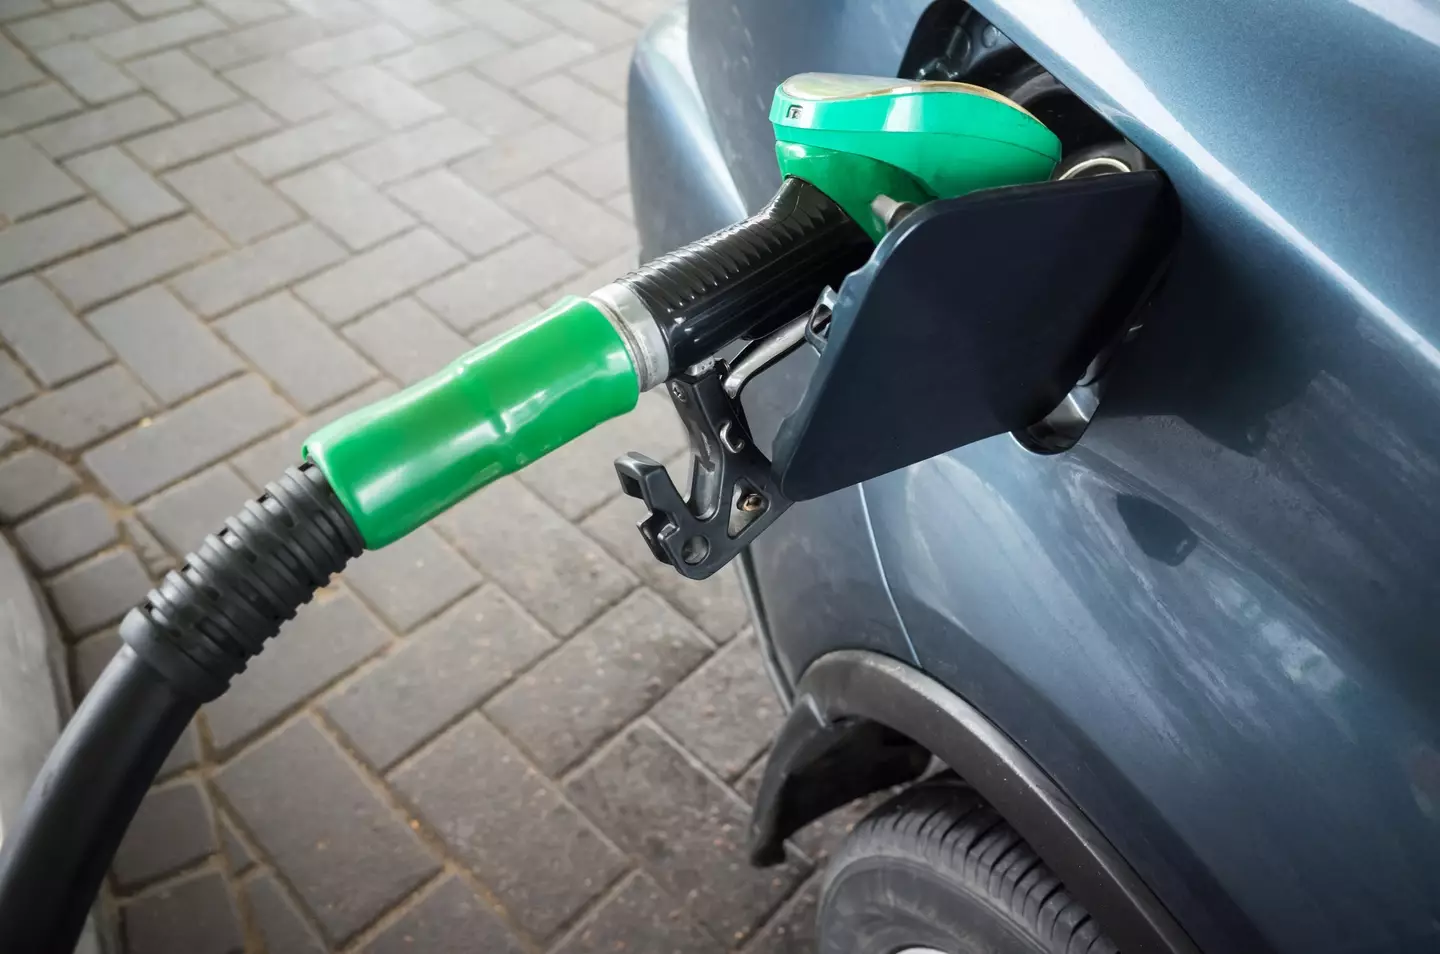 A sustainability expert has warned against buying fossil fuel cars.